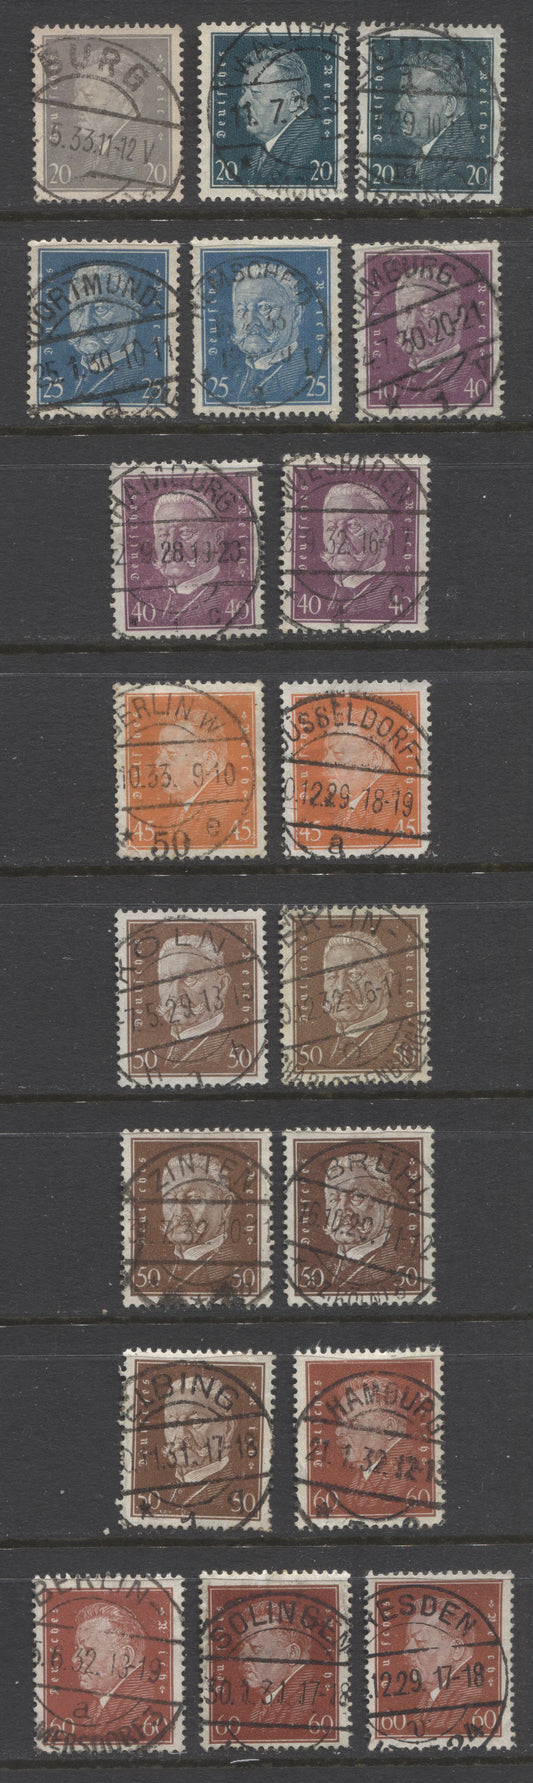 Lot 445 Germany SC#375/382 1928-1932 Ebert & Hindenburg Definitives, All With SON Town Cancels, 18 VF Used Singles, Click on Listing to See ALL Pictures, 2022 Scott Classic Cat. $41.15